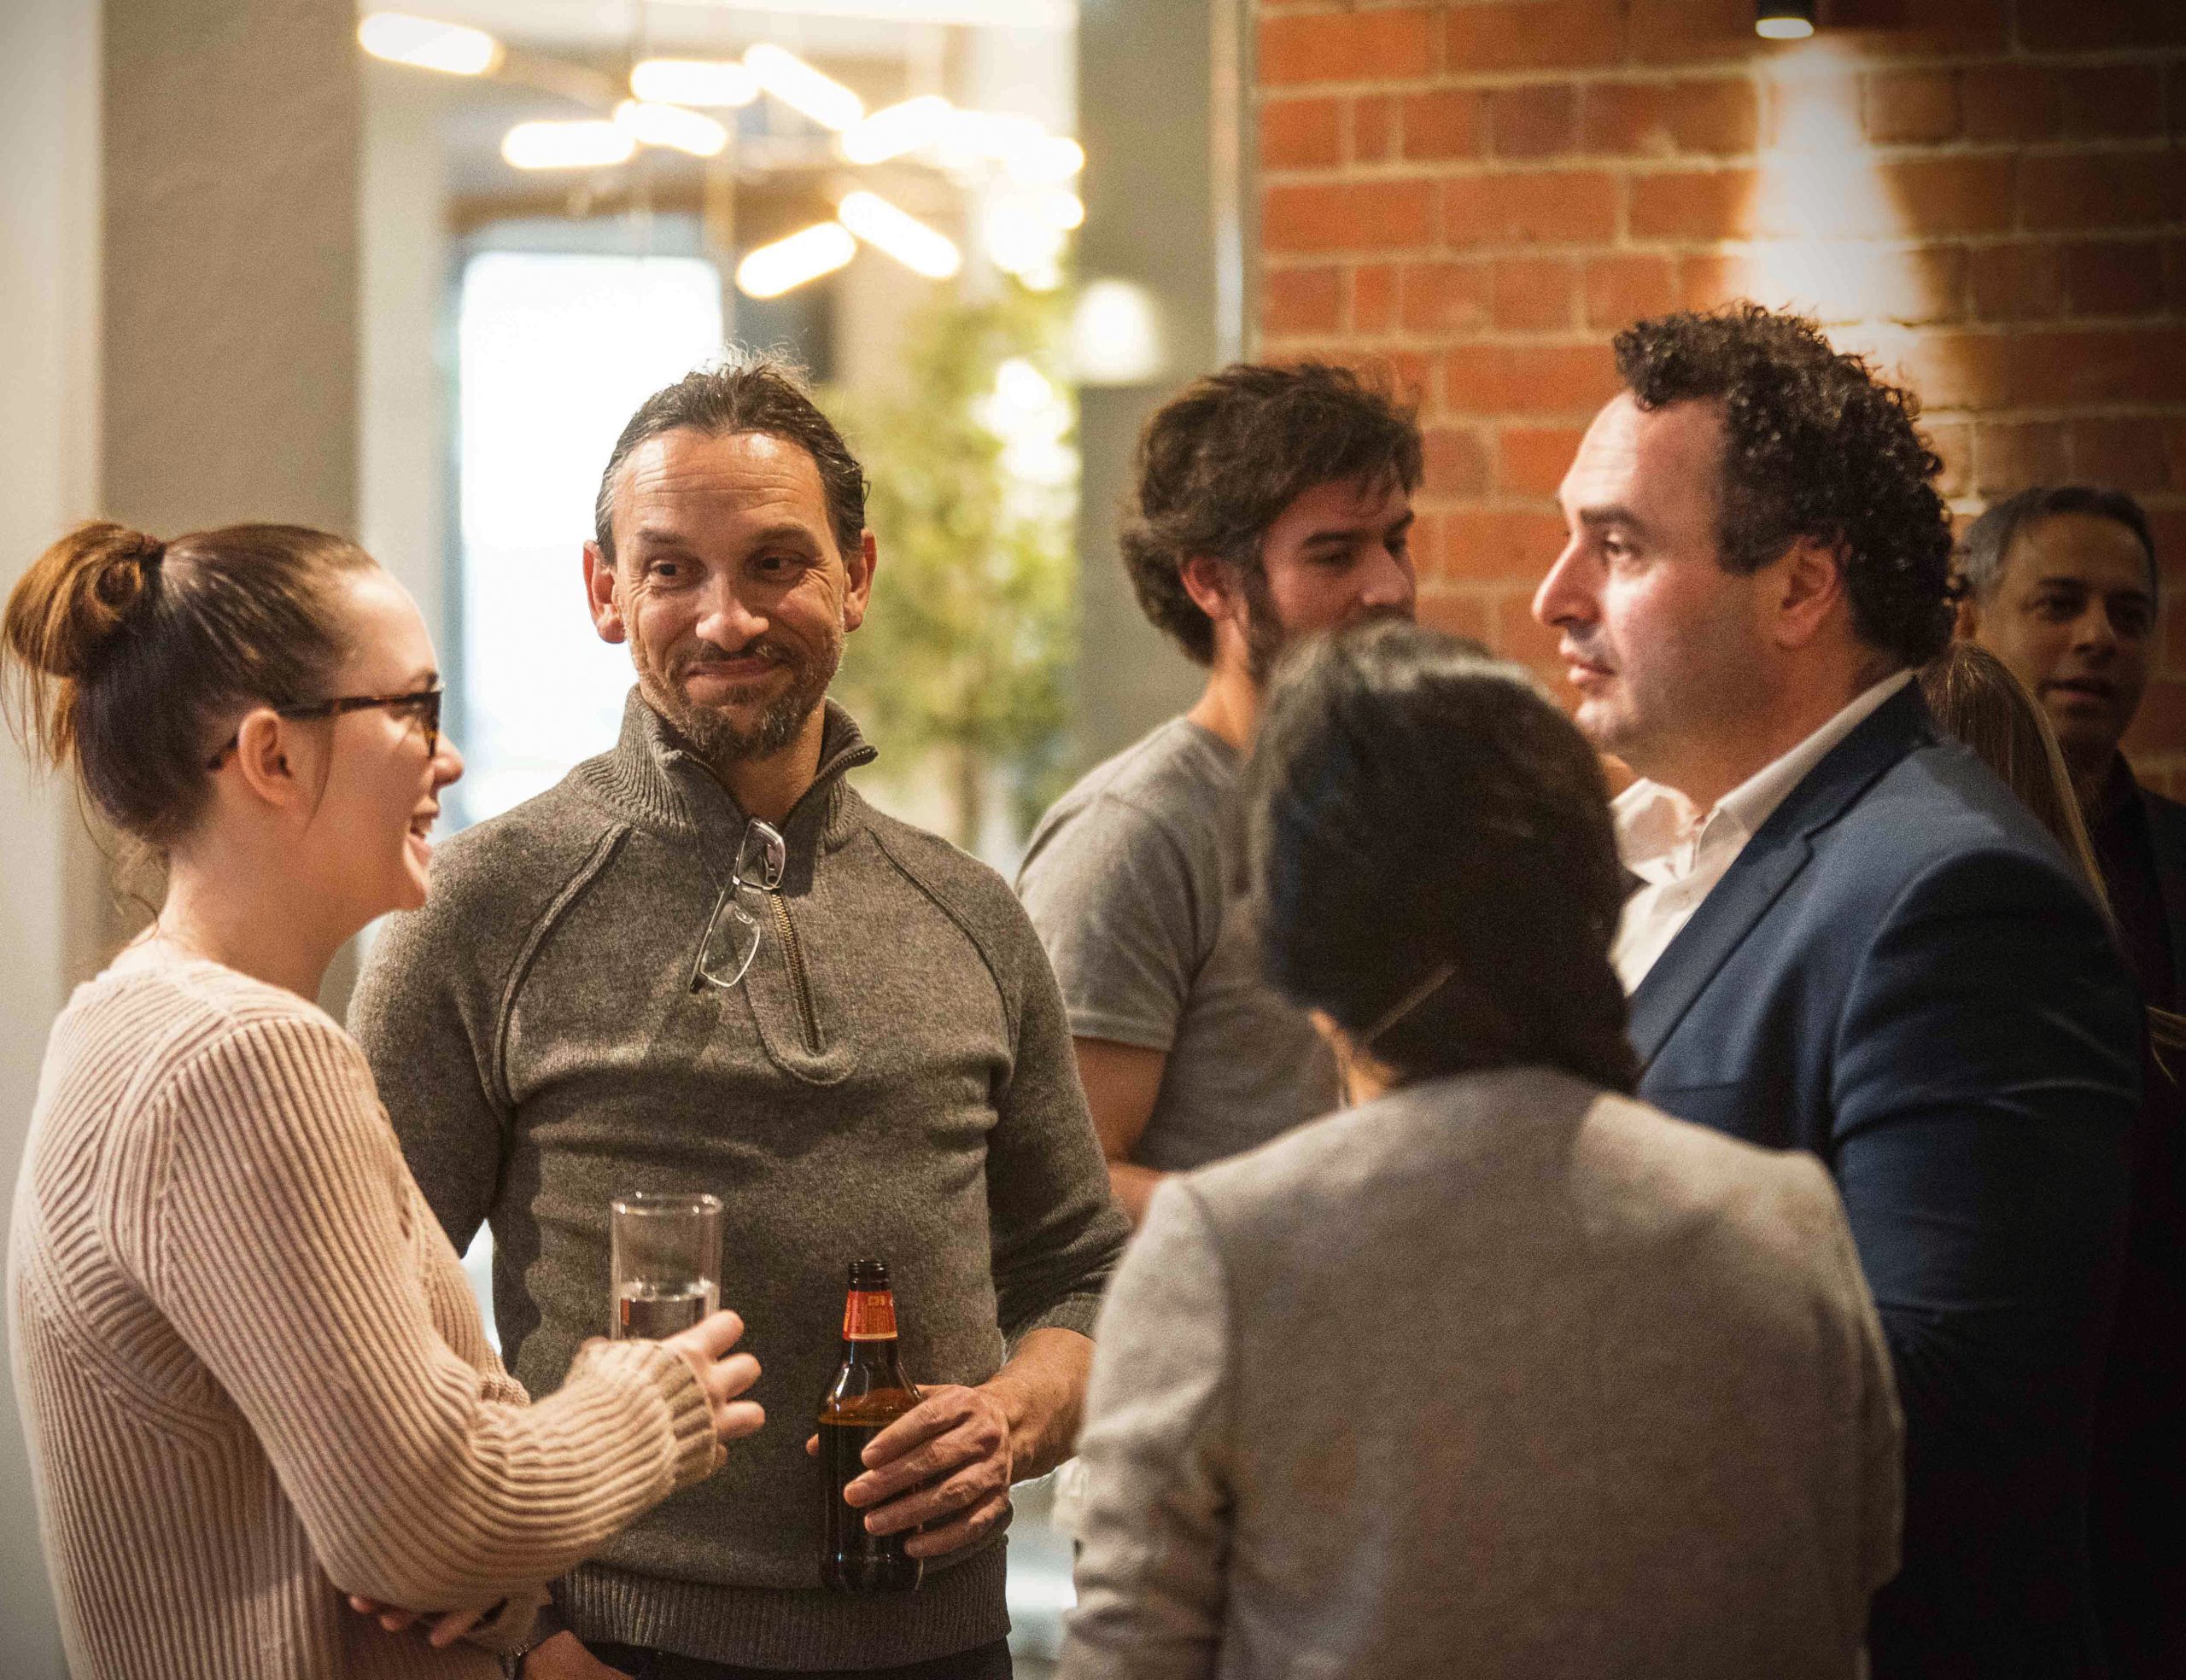 Benefits of Socializing in Coworking Spaces